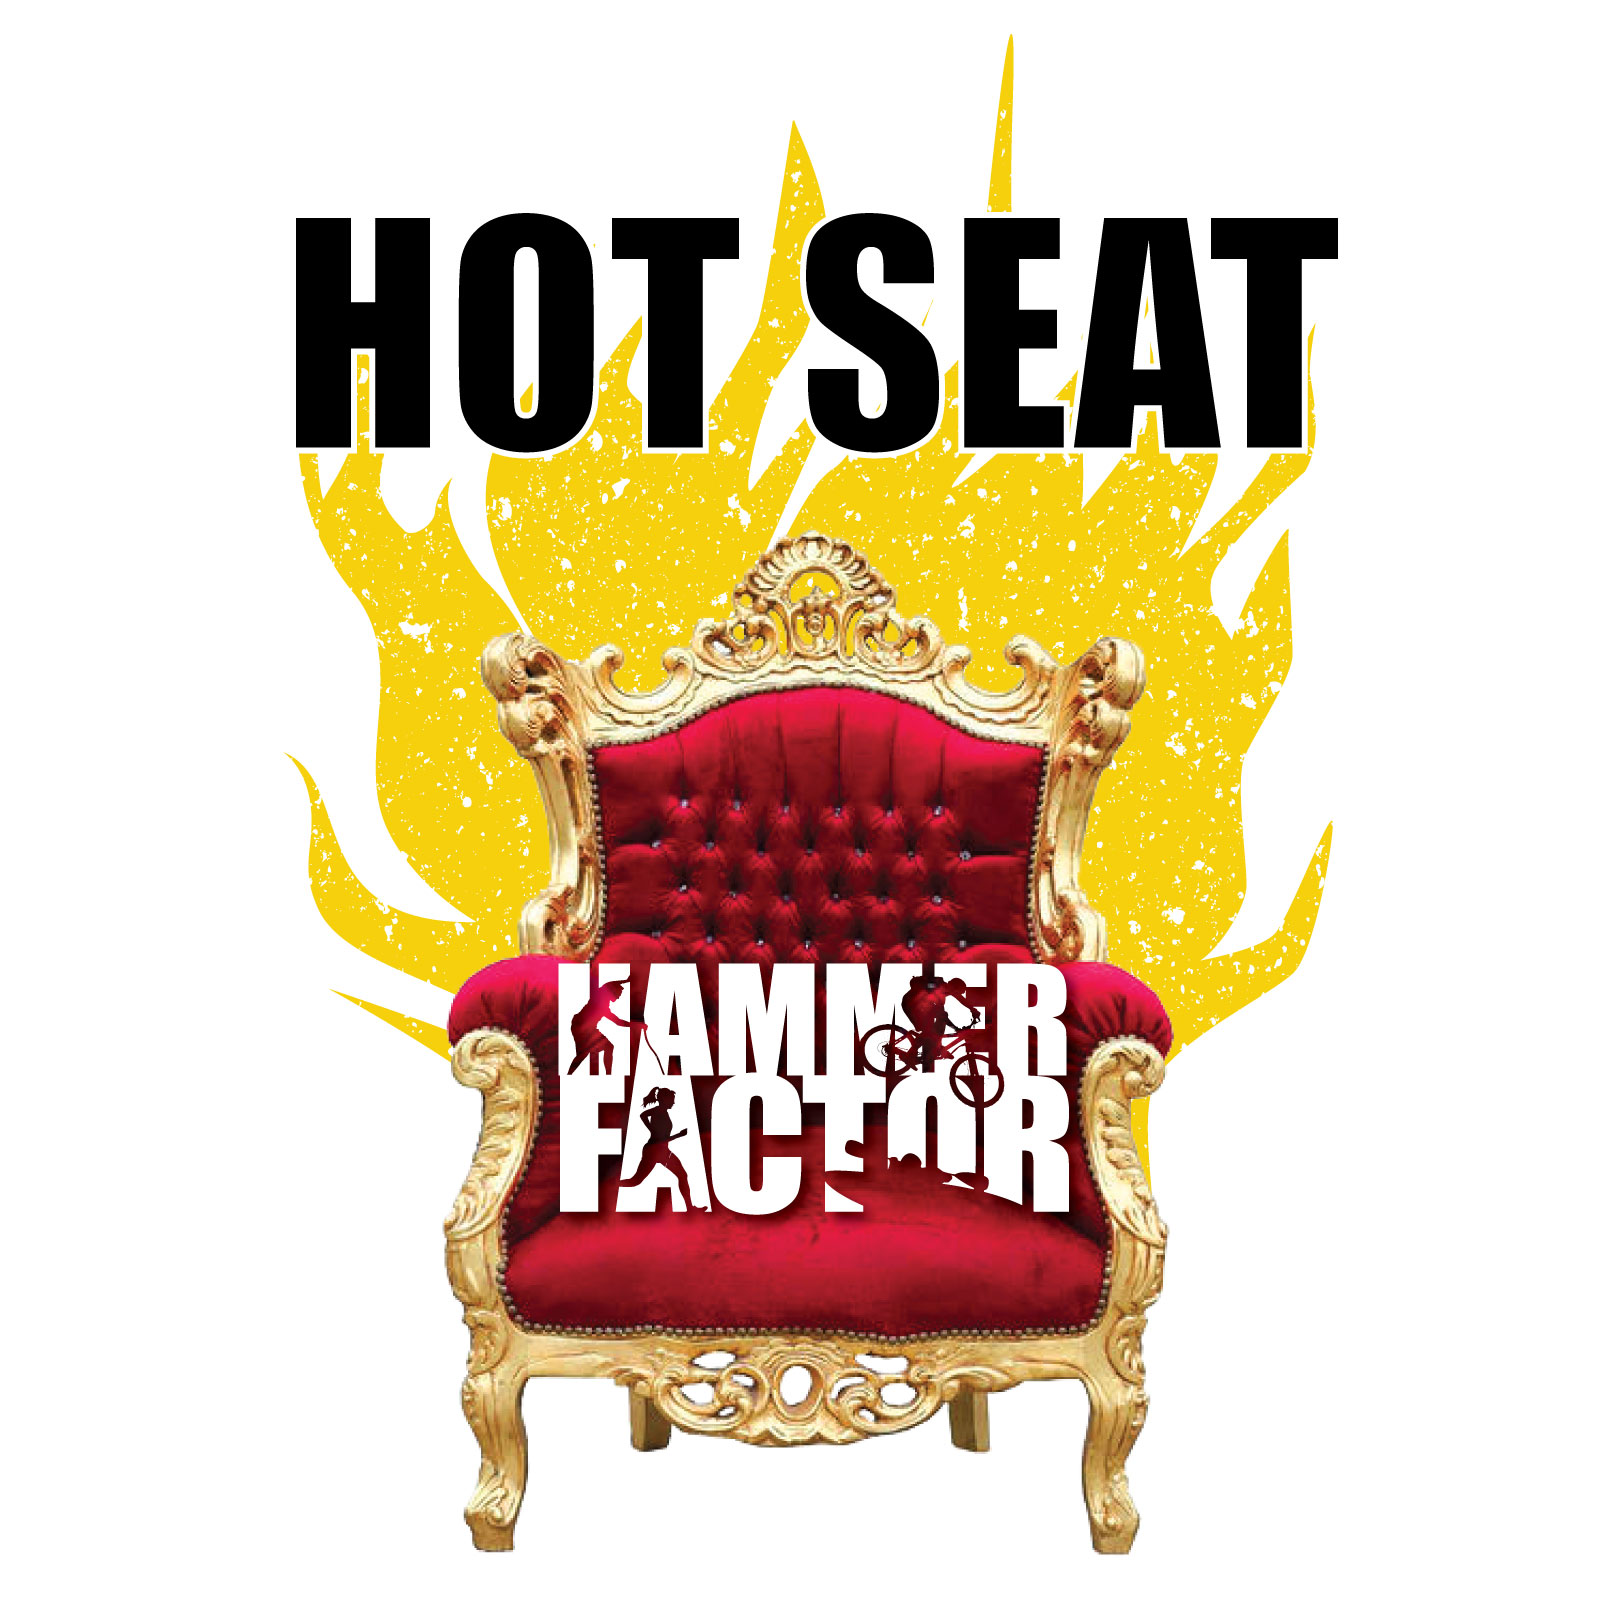 20 Darcy Gaechter in the Hot Seat Hammer Factor Hot Seat Podcast